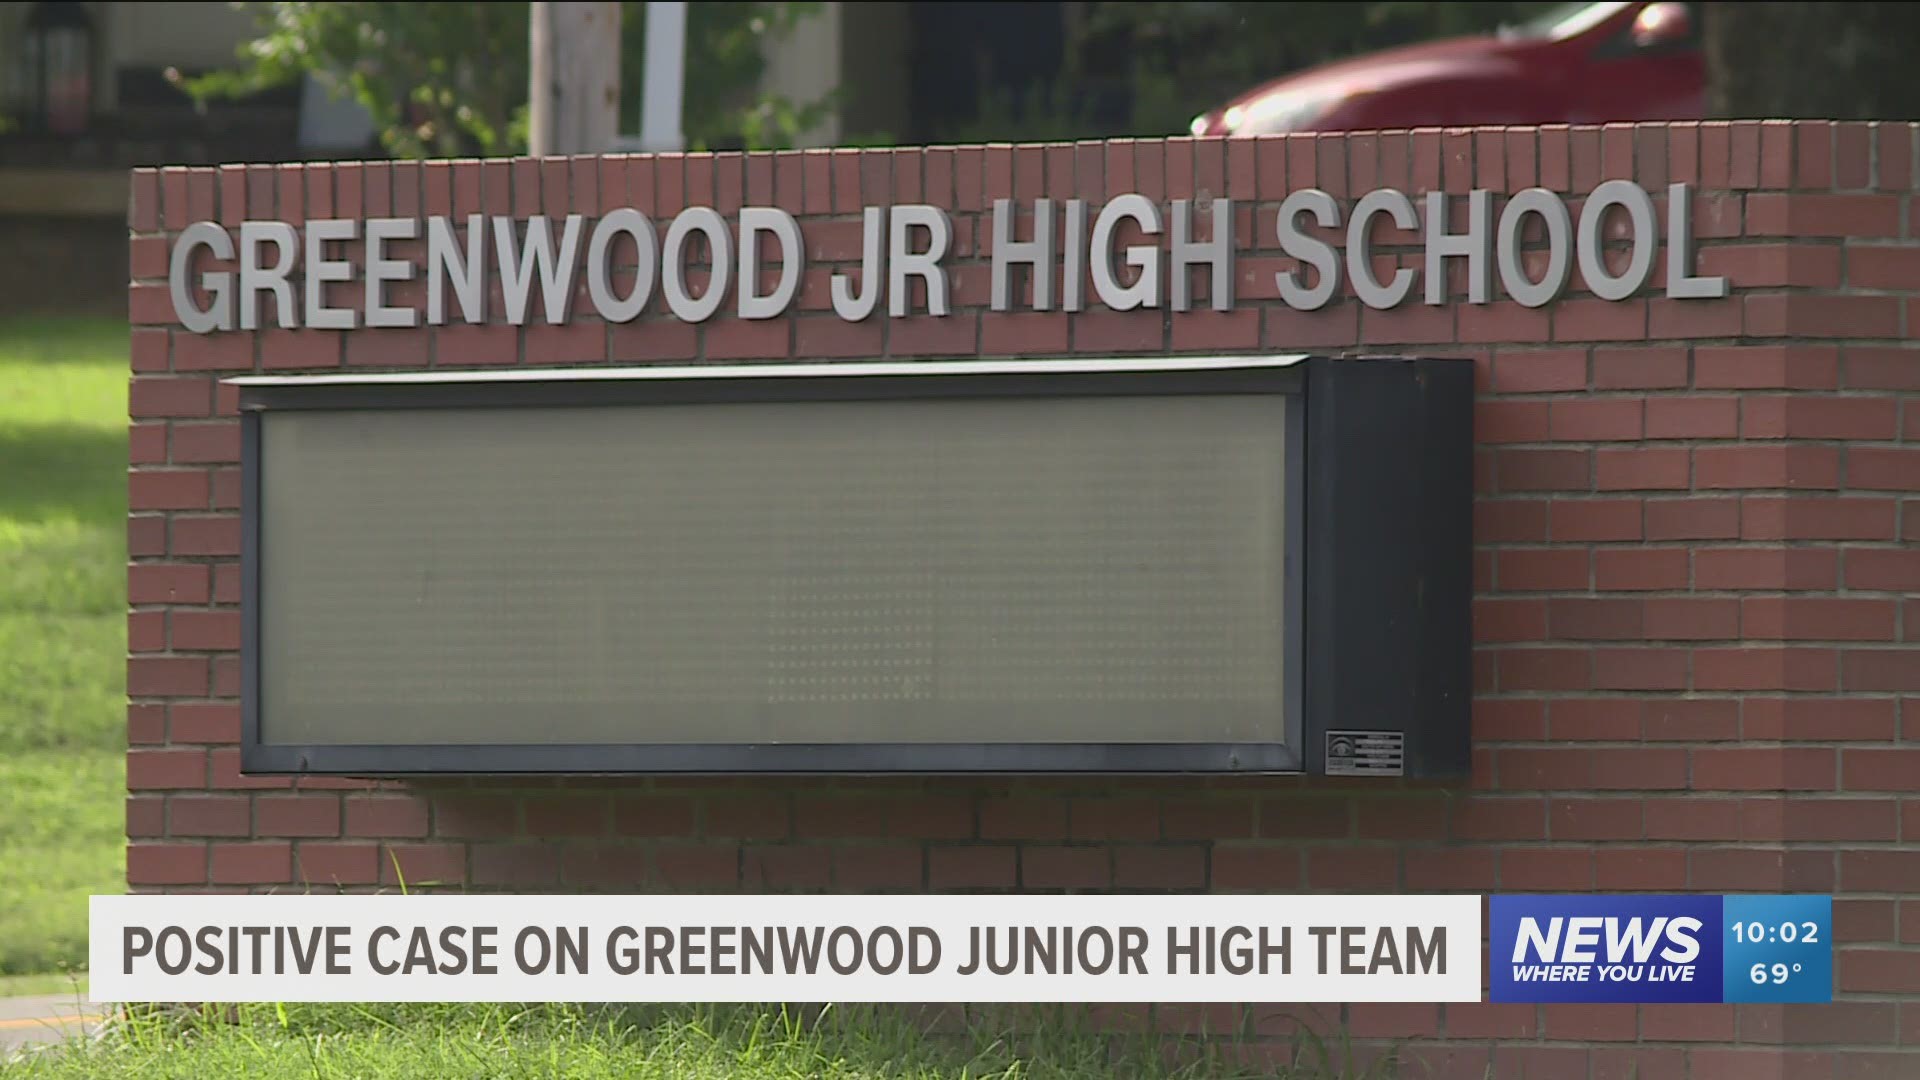 The Greenwood School District announced on Friday that the entire seventh-grade football team had gone into quarantine following a positive COVID-19 test.